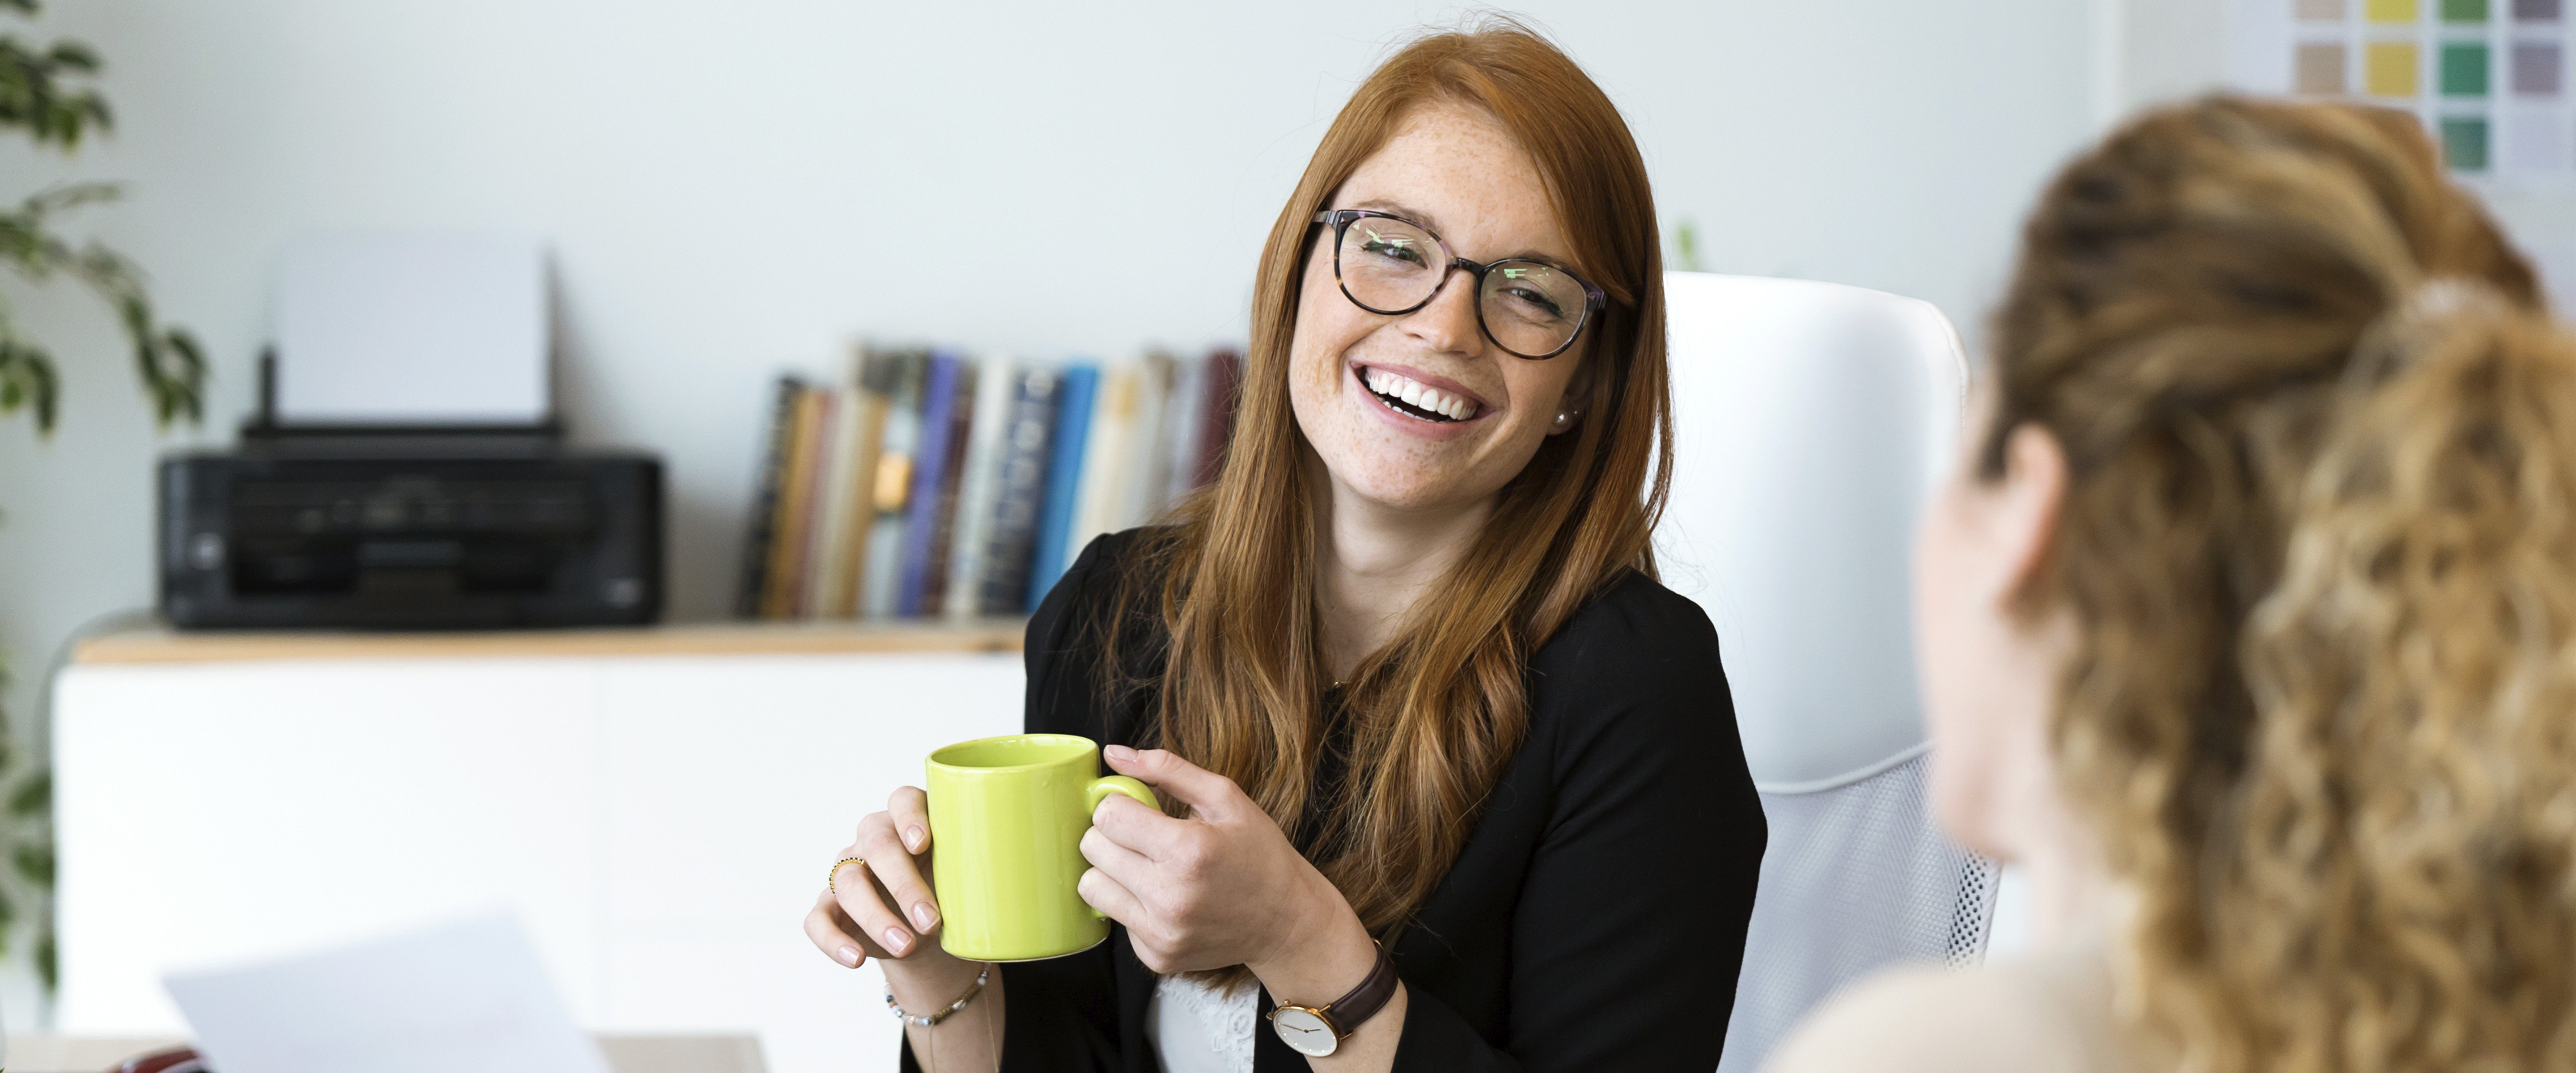 smiling woman with coffee cup talking to coworker at desk